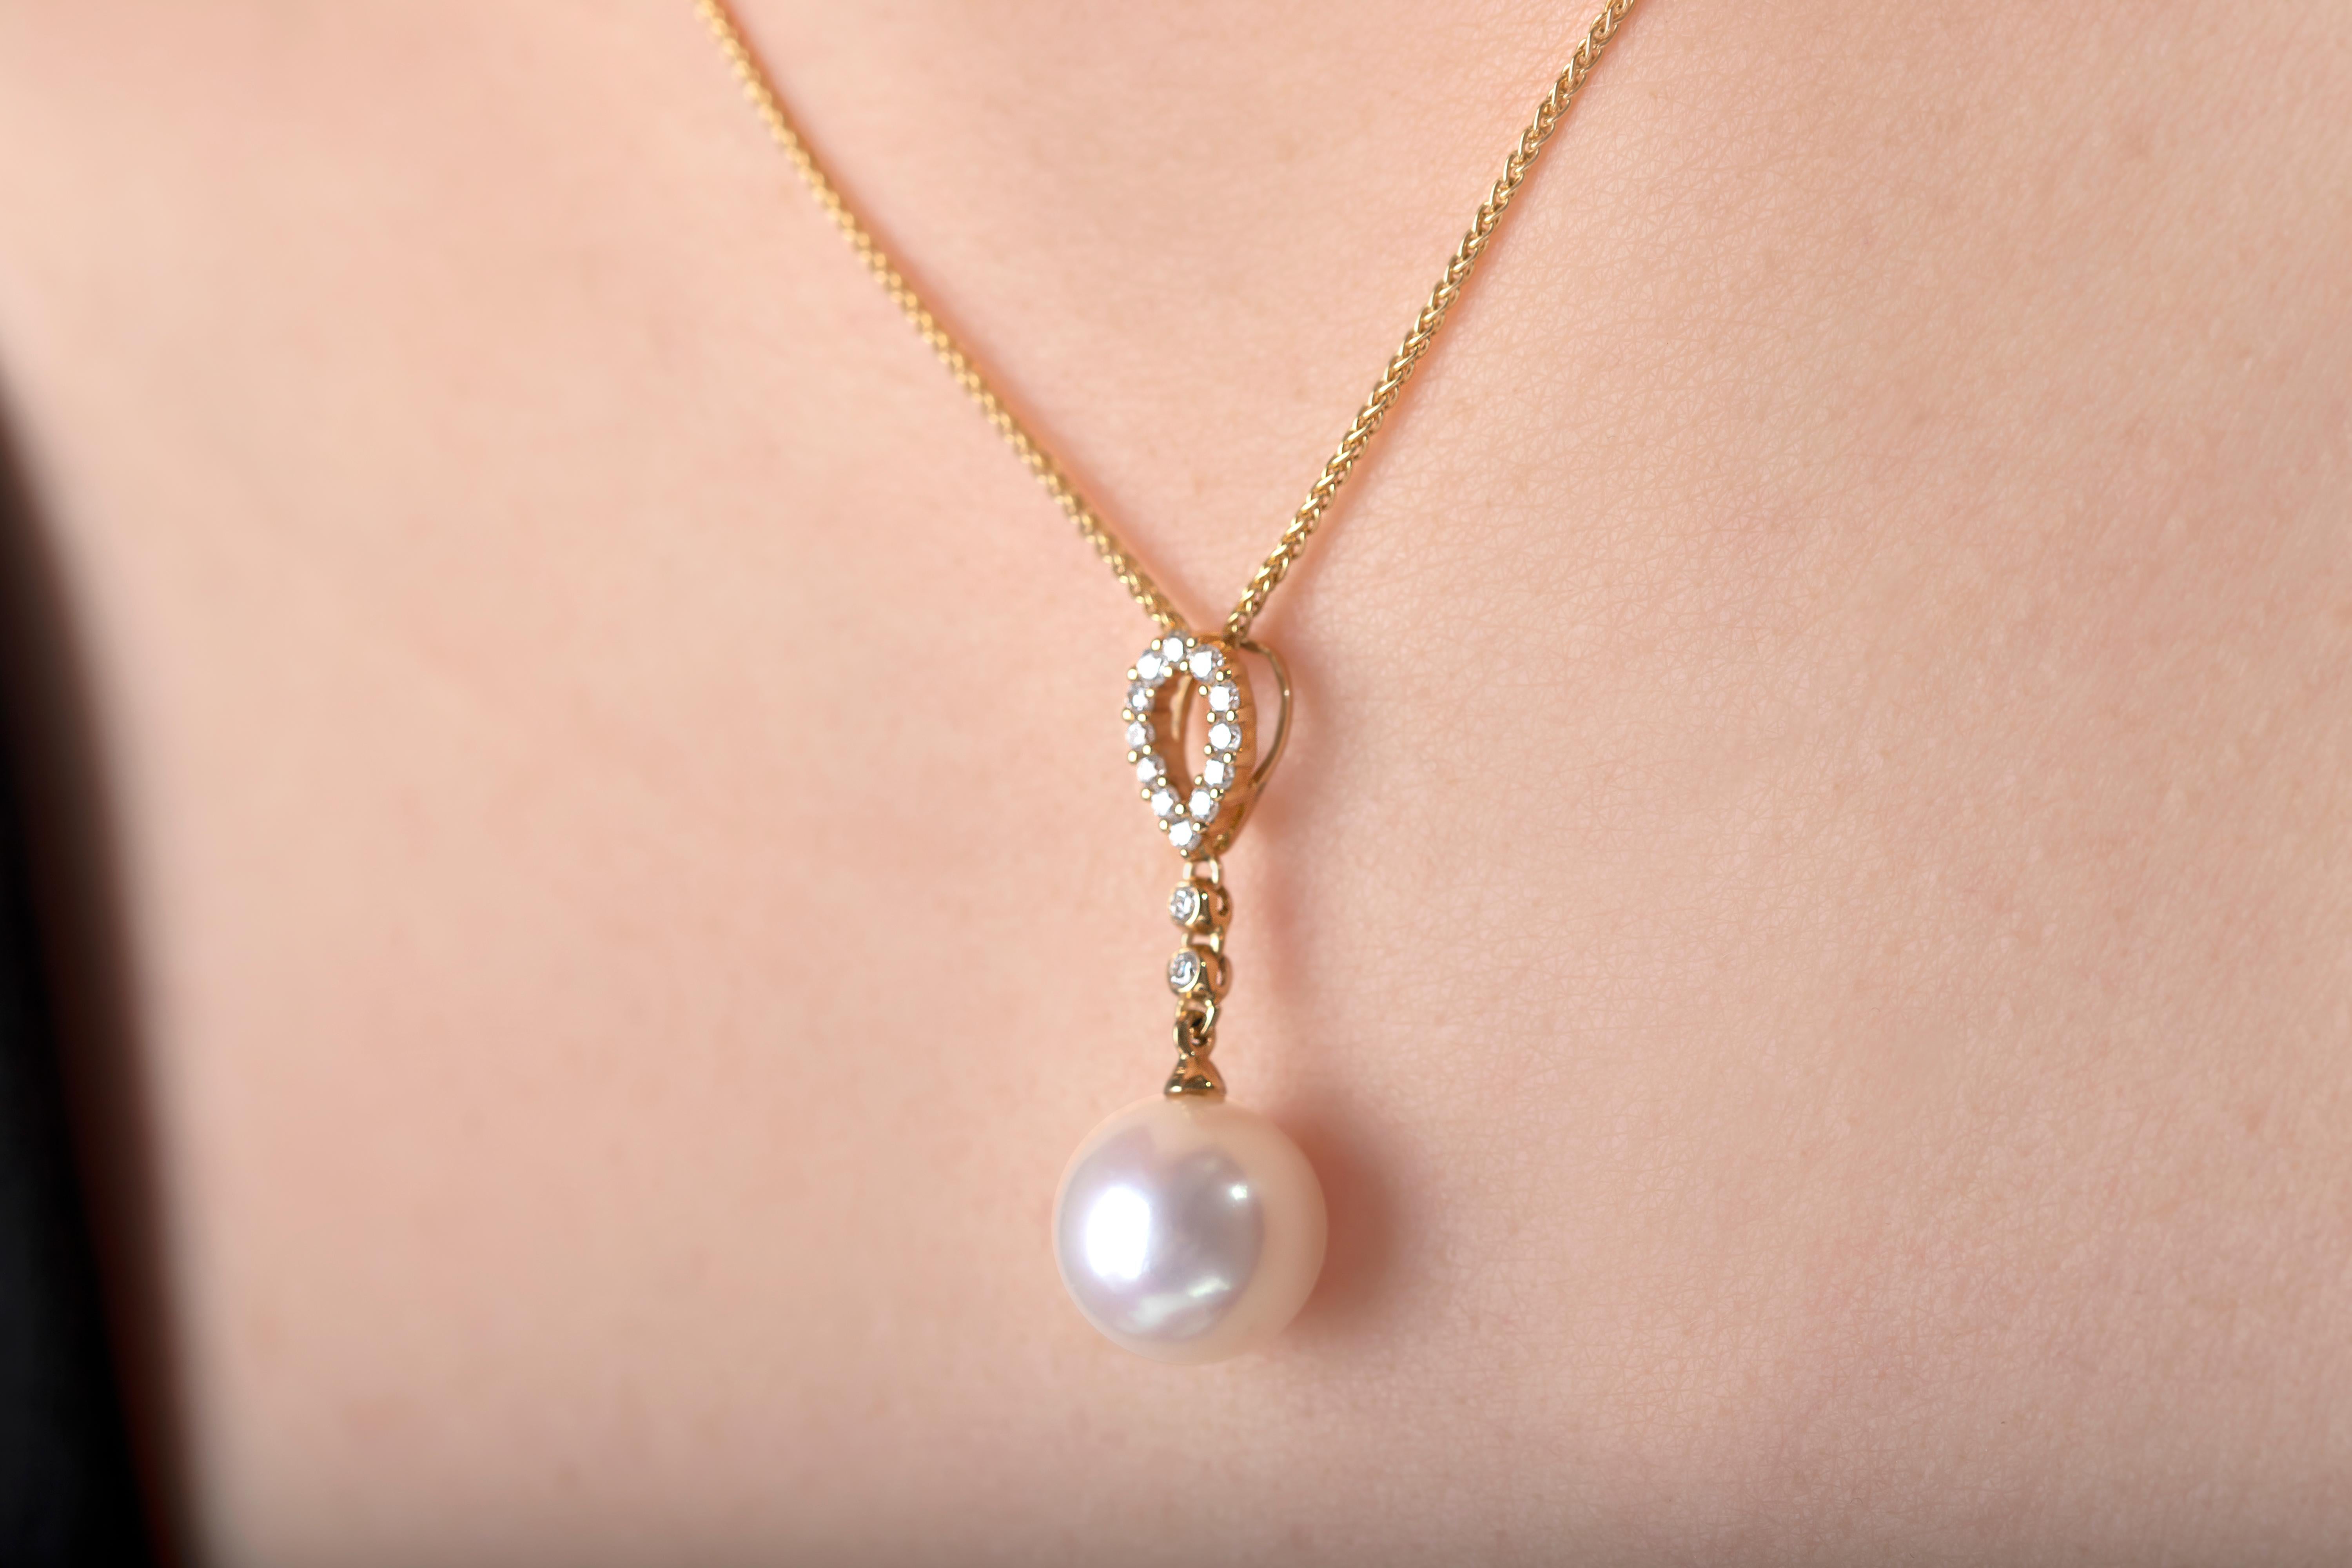 This elegant pendant by Yoko London combines the classic combination of Pearls, Diamonds and Yellow Gold in a pretty design suitable for daily use. Style with the matching drop earrings for a perfectly balanced image. Each Yoko London pearl has been